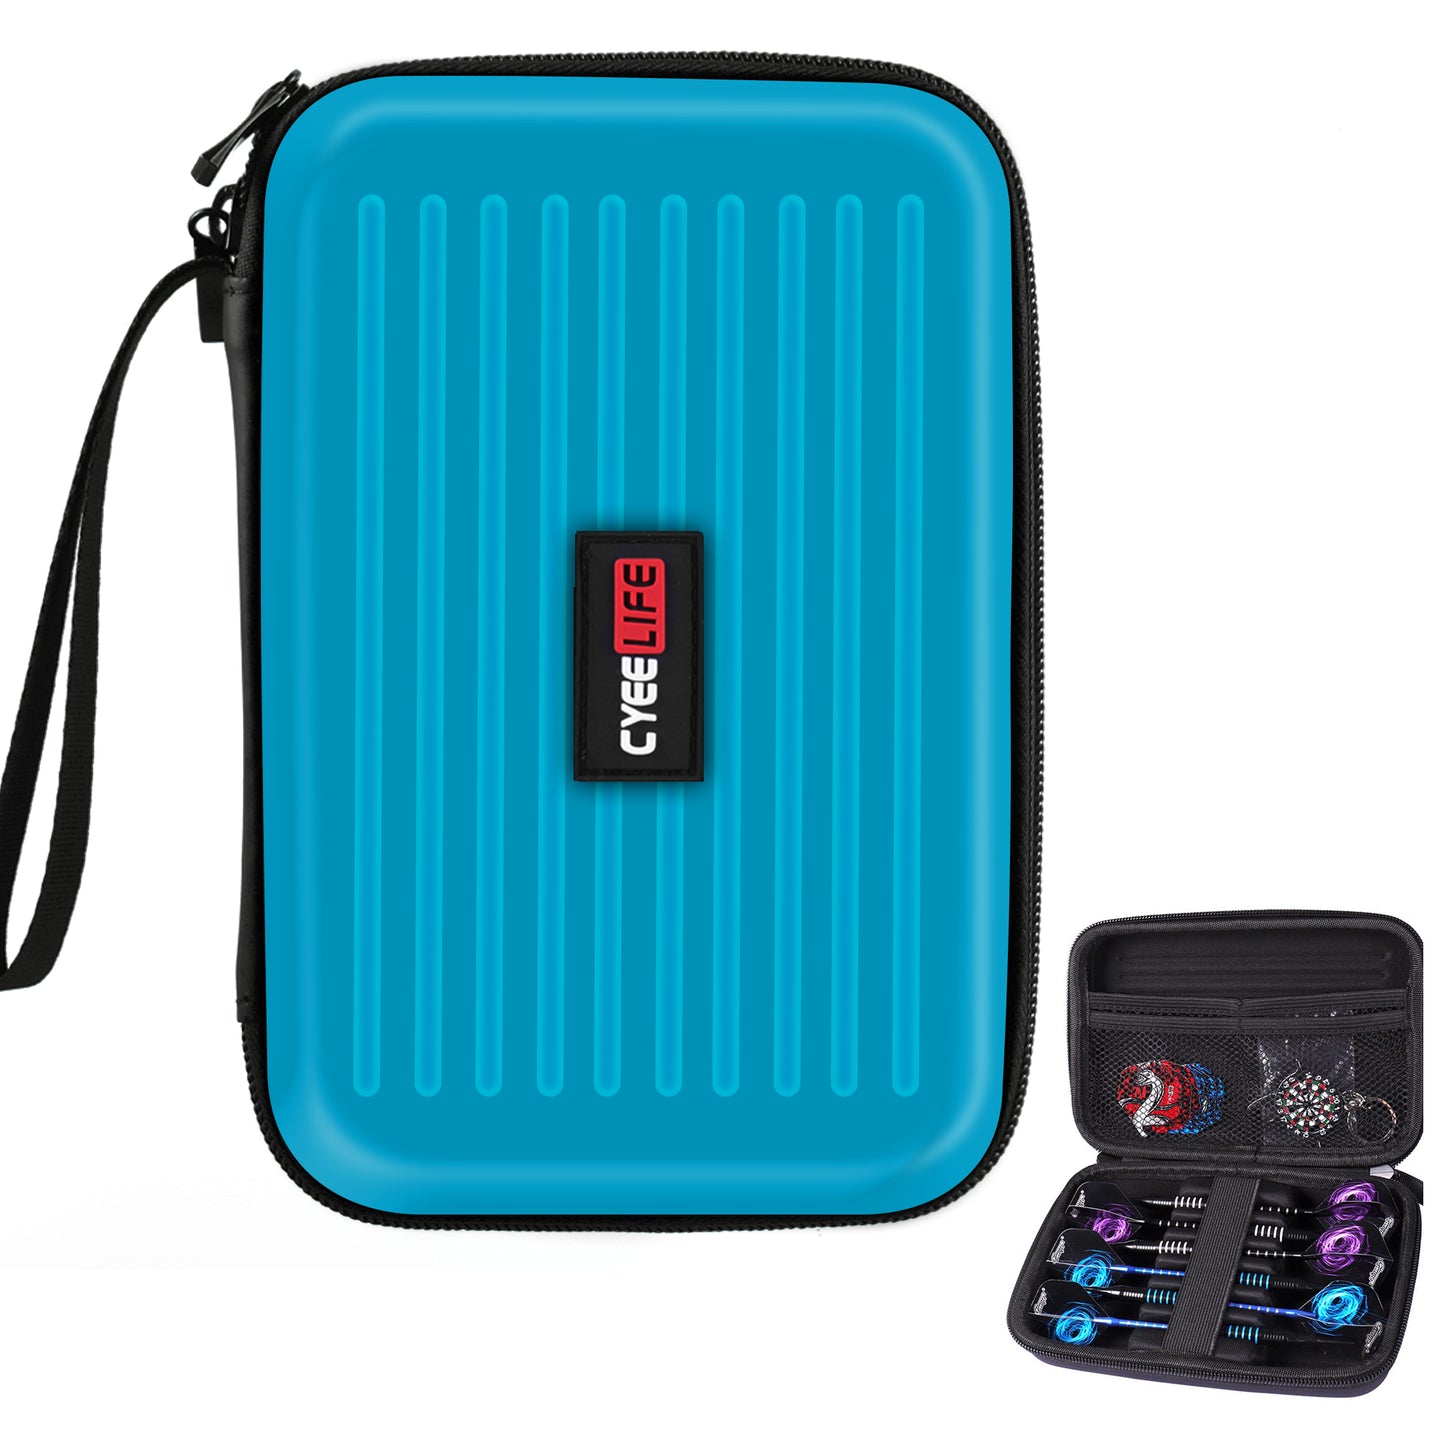 ZX03B PU Dart Carry case For 6 Darts(Only case),black/blue